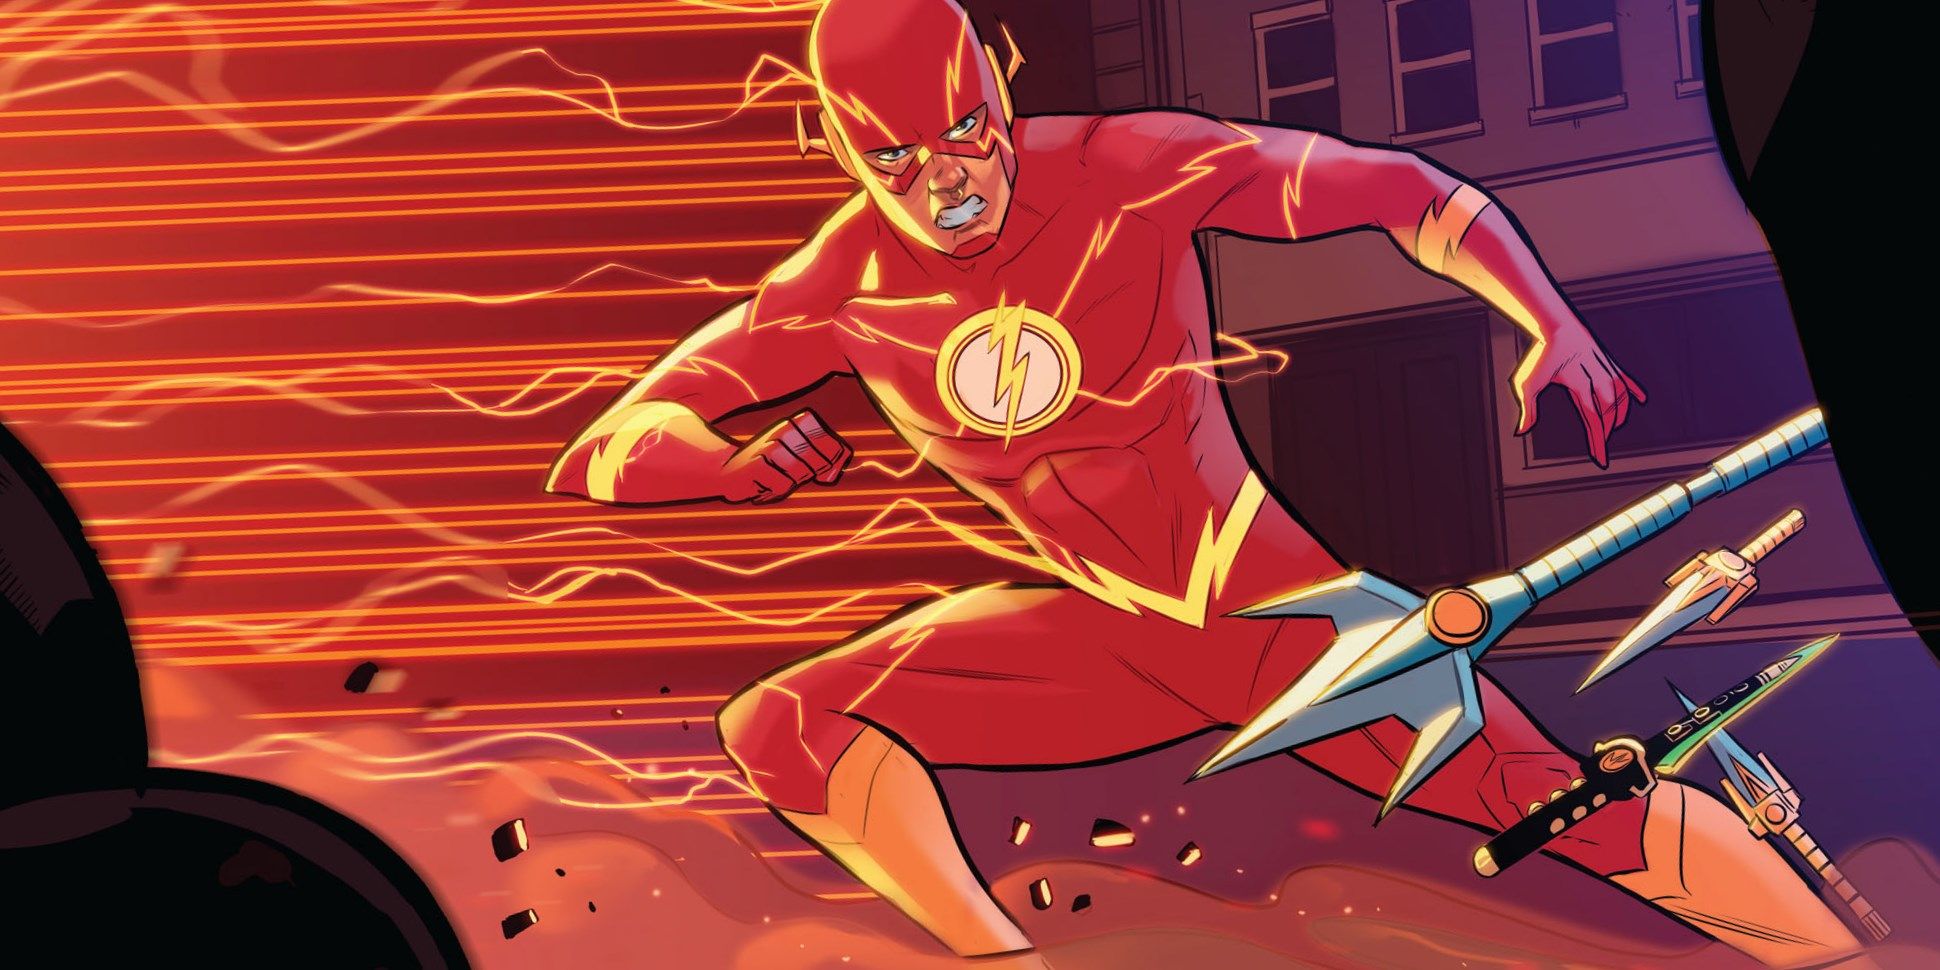 20 Insane Ways That The Flash Uses His Powers